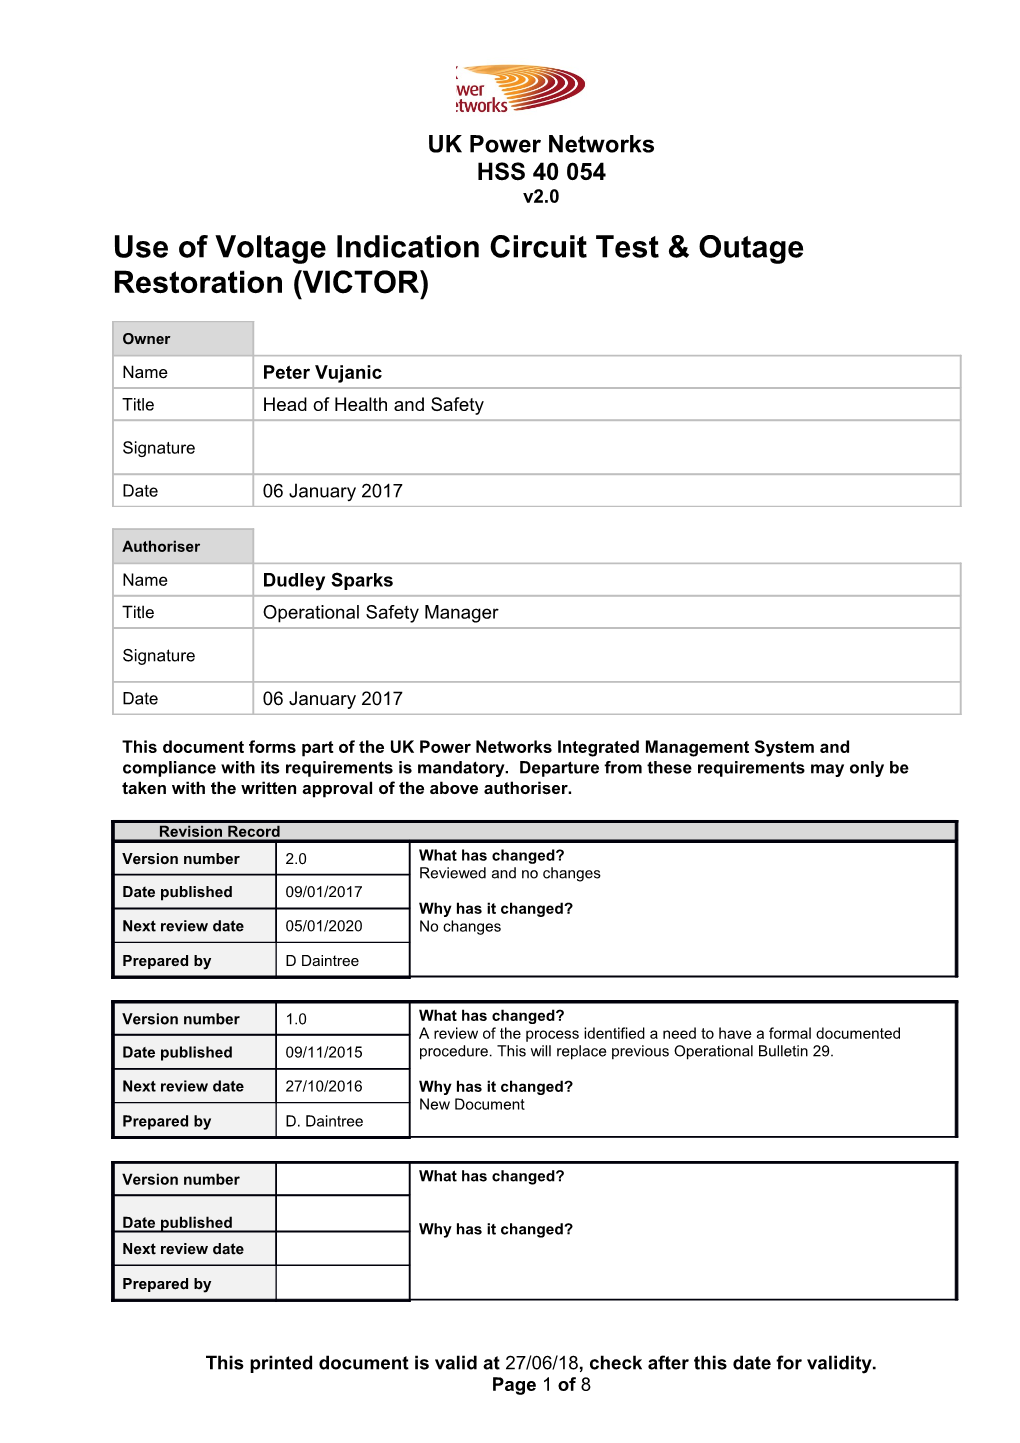 HSS 40 054 Use of Voltage Indication Circuit Test & Outage Restoration (VICTOR)